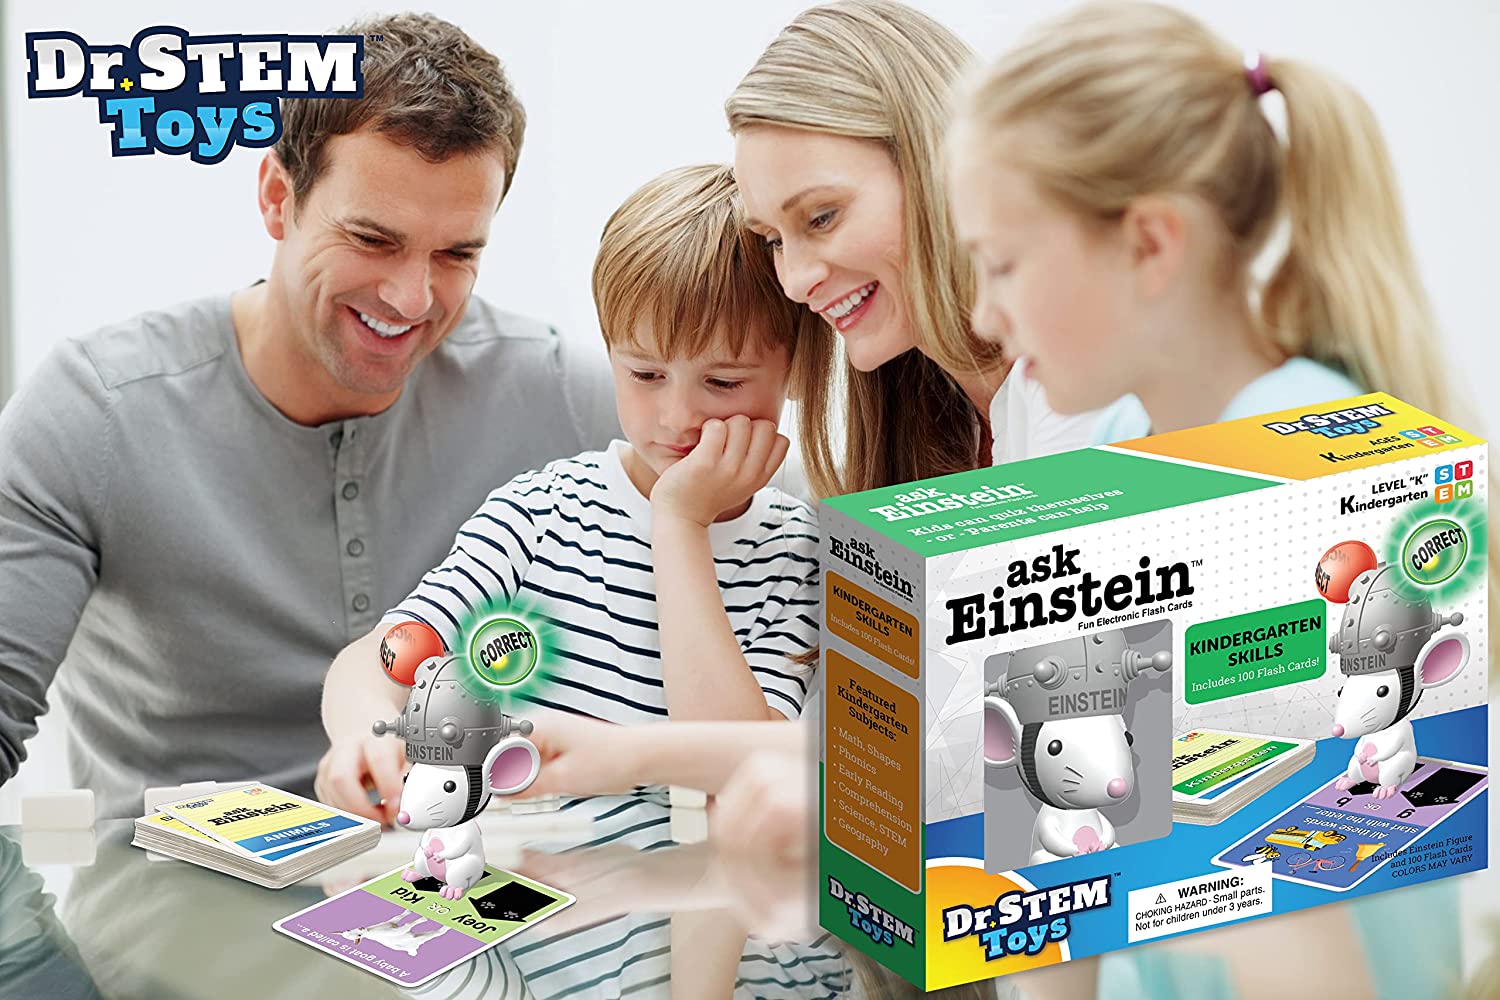 Dr. STEM Toys Ask Einstein Electronic Flash Cards - Kindergarten Skills Set Includes Interactive Mouse and One Hundred Flash Cards